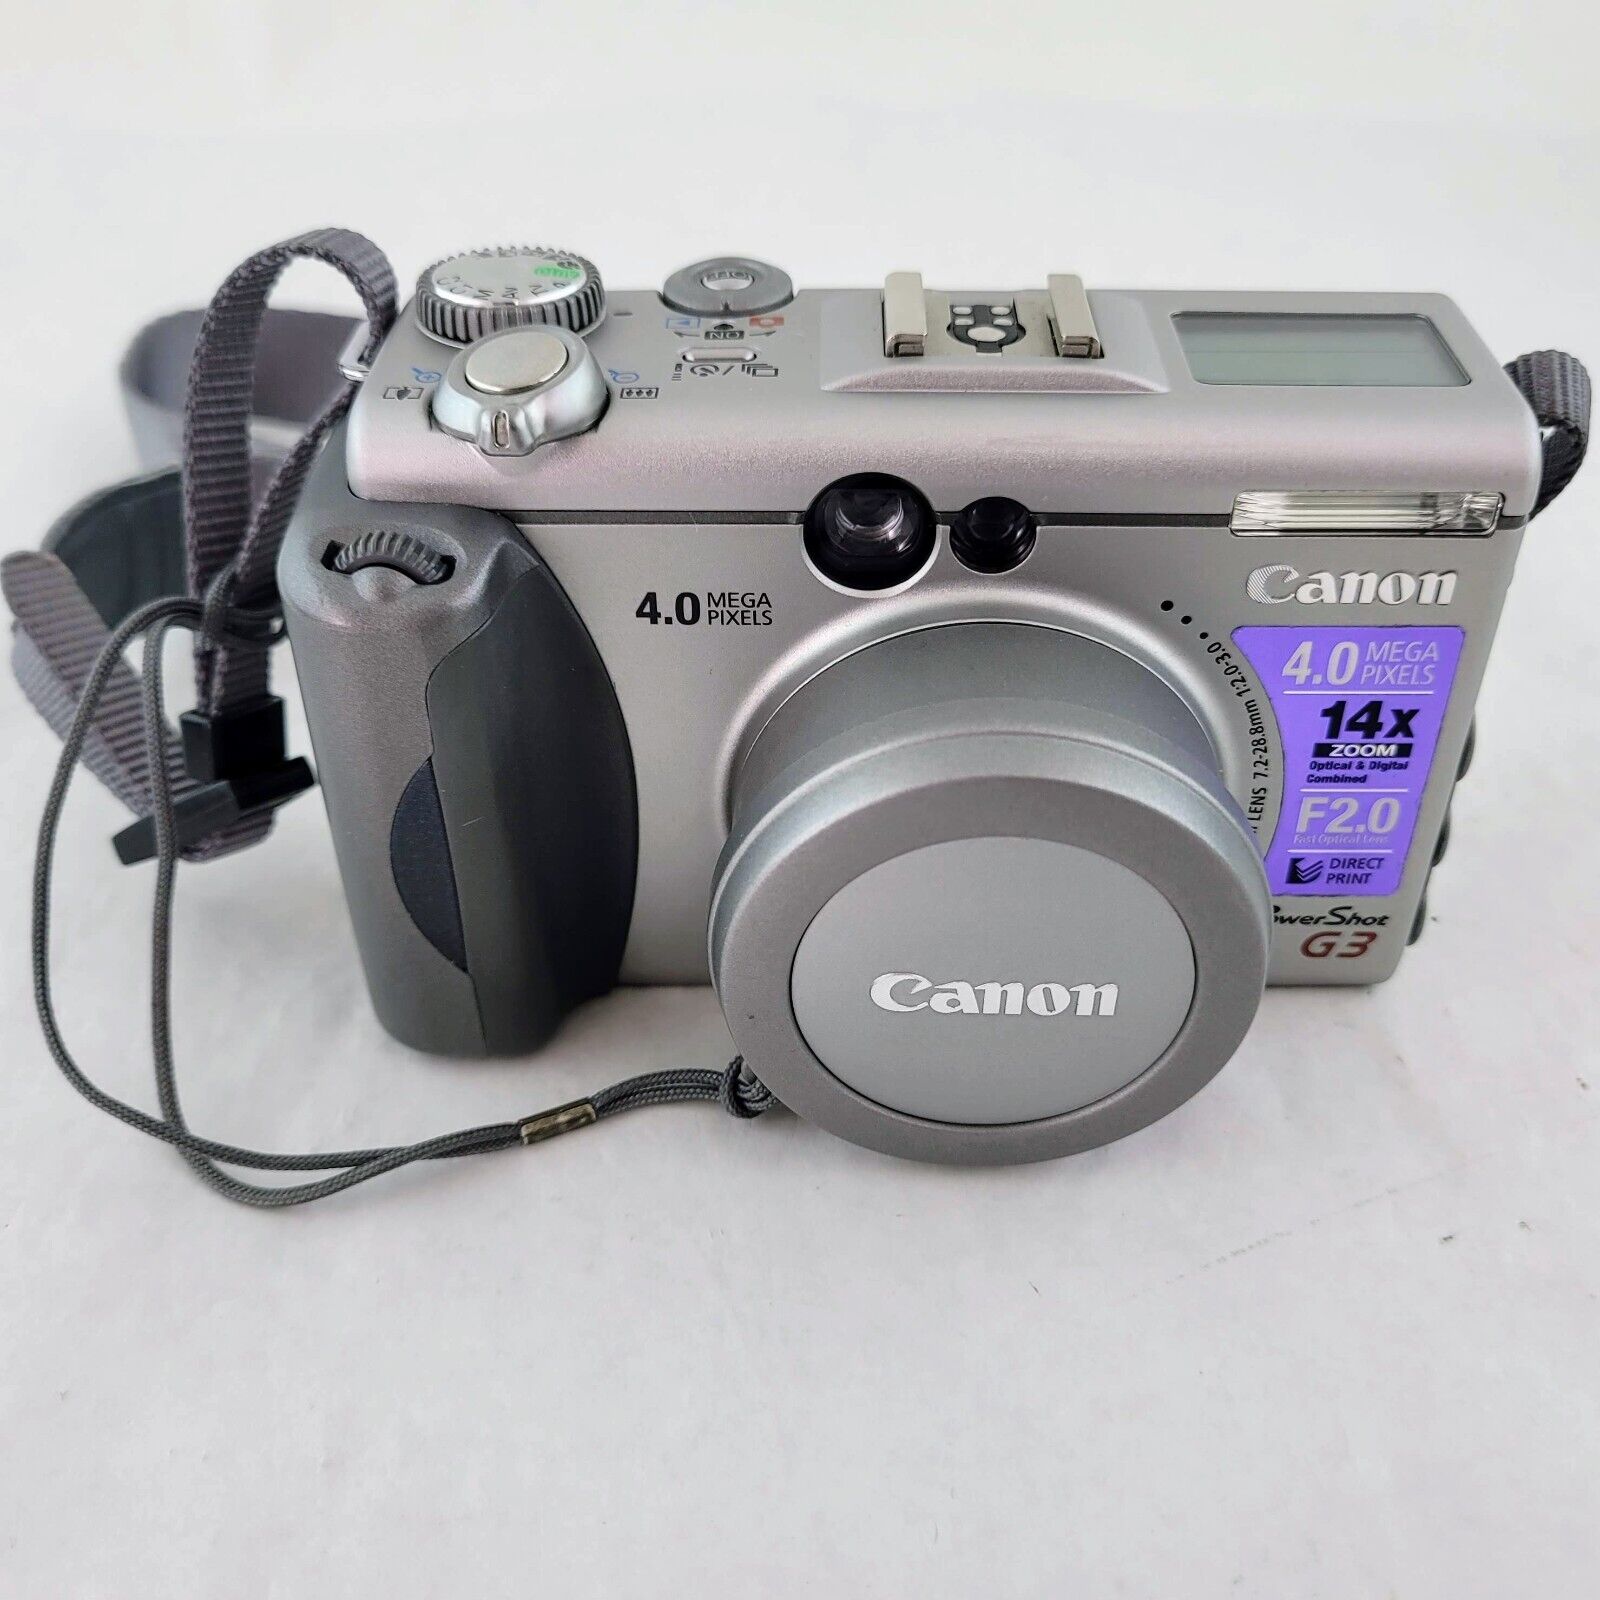 Canon PowerShot G3 4.0MP Digital Camera - Silver for sale online 